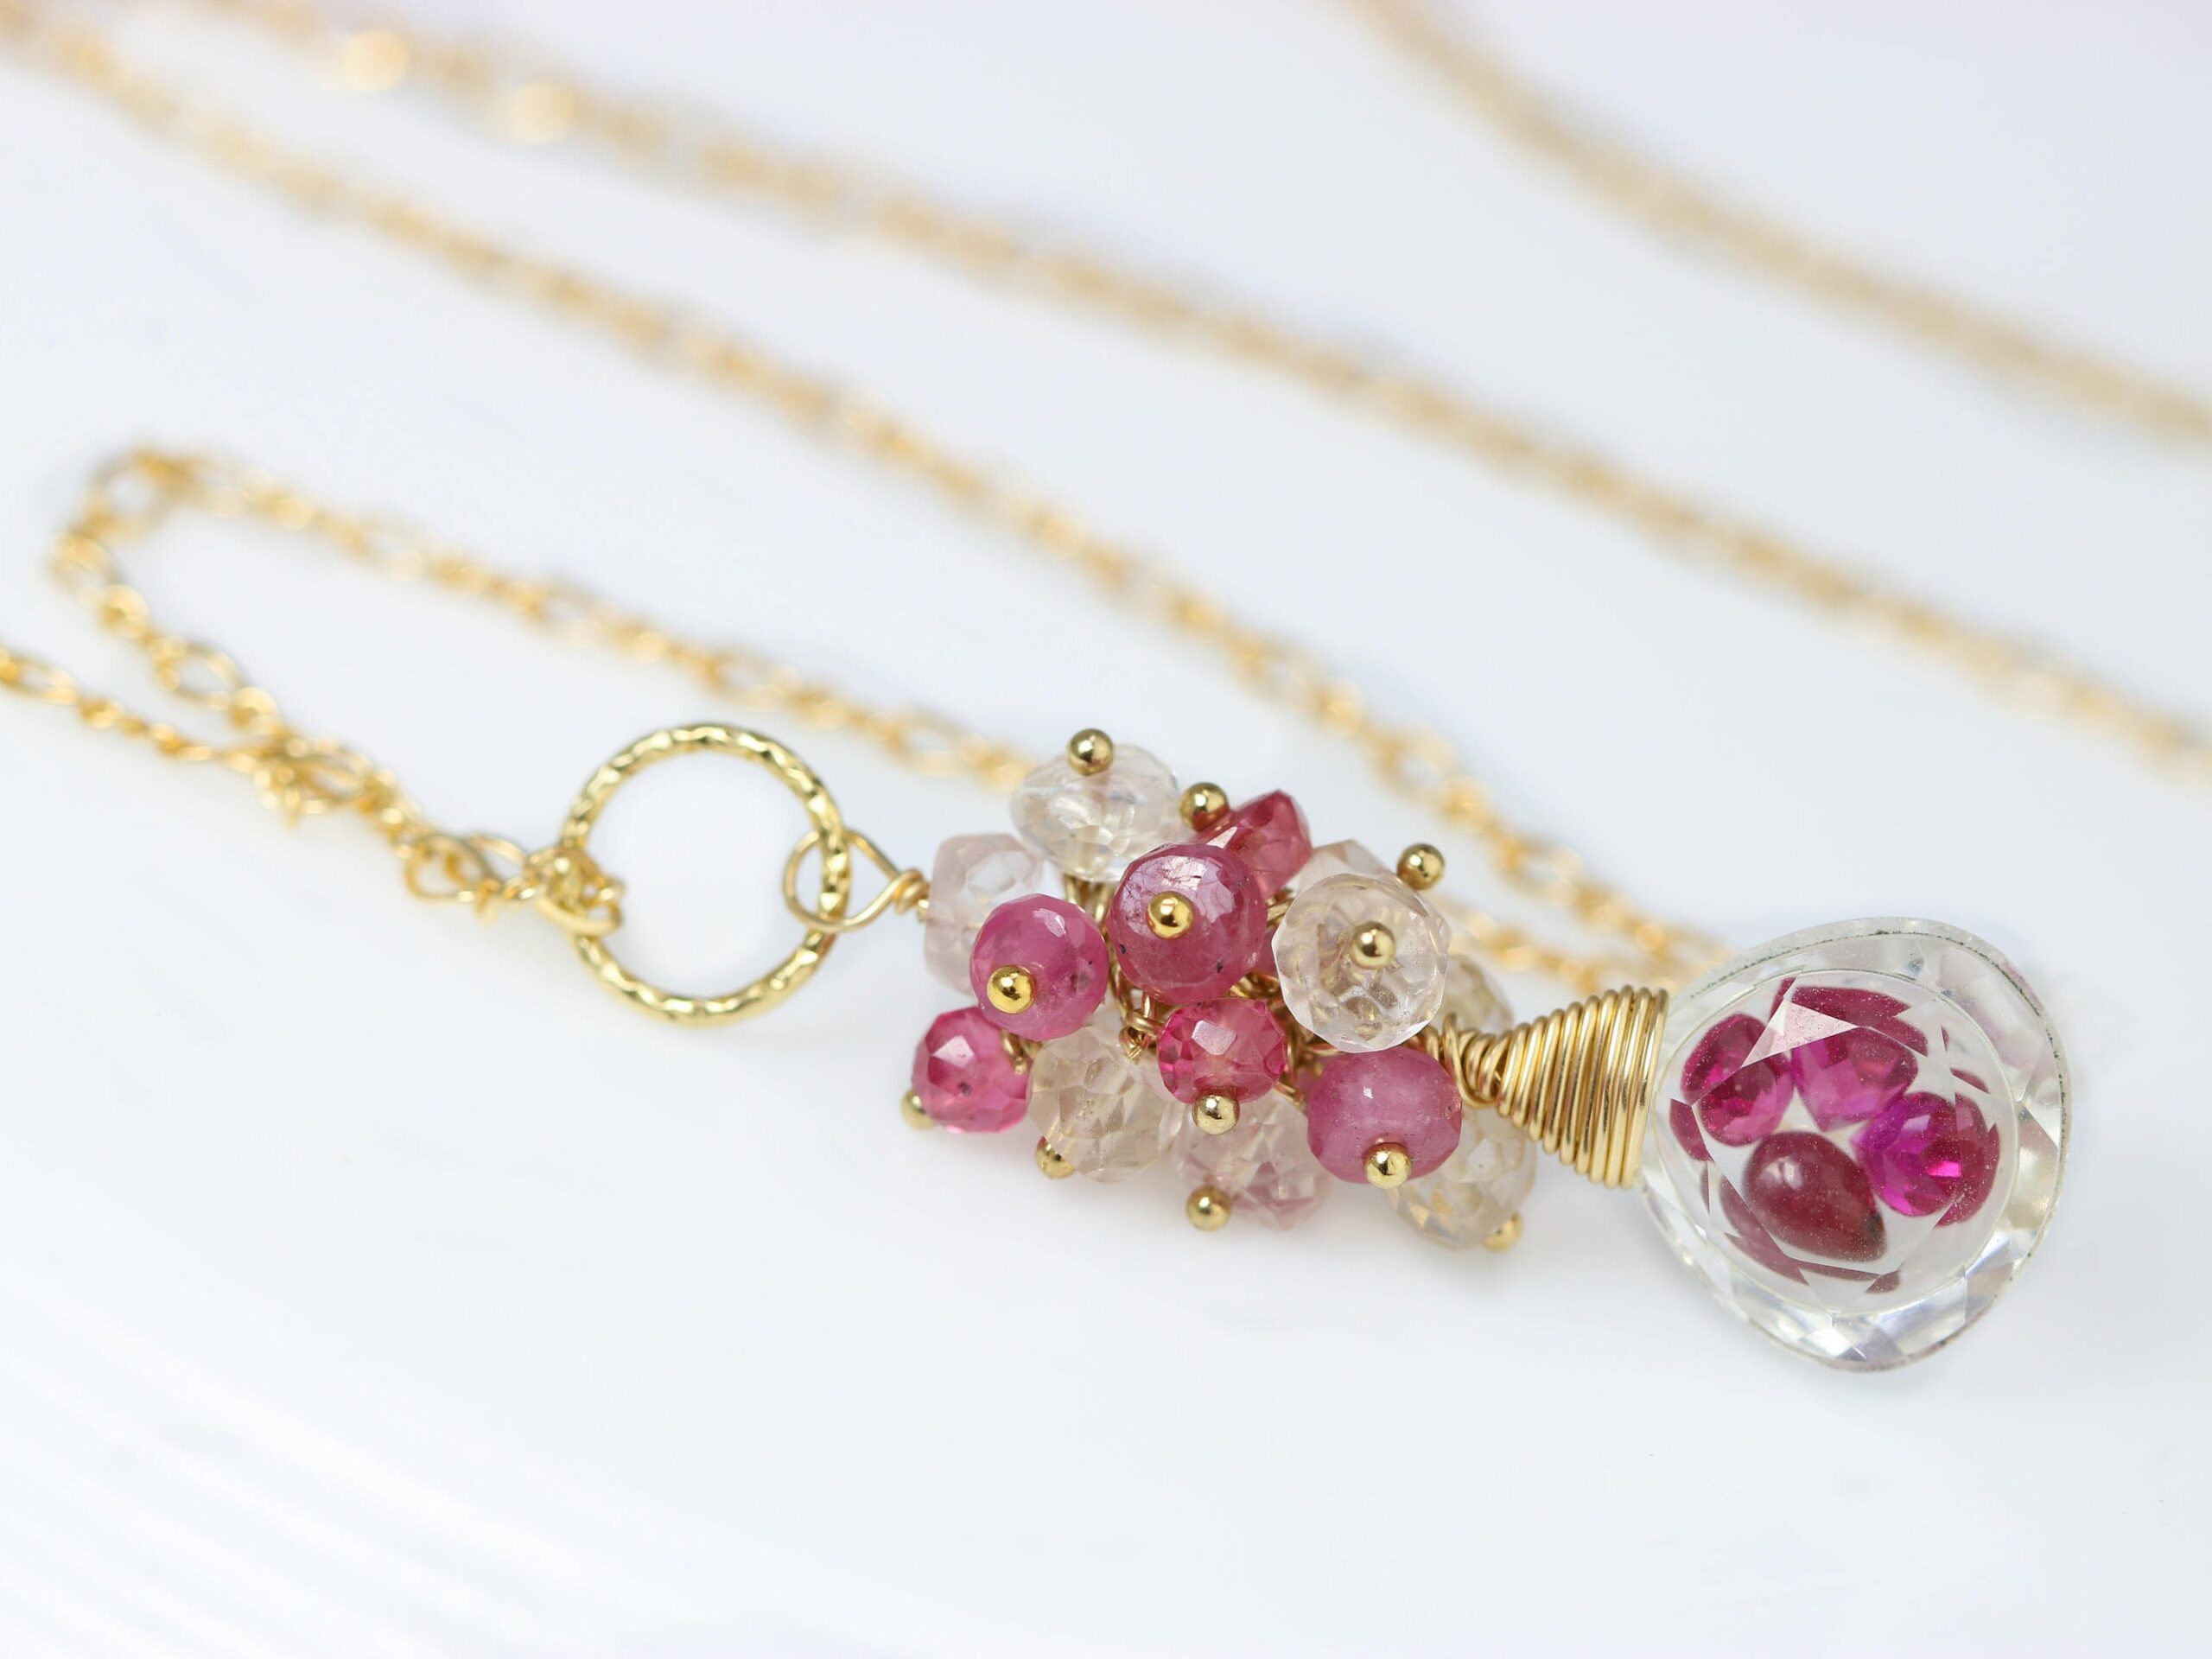 Floating Pink Gemstone Pendant Necklace in Gold Filled, One of a Kind